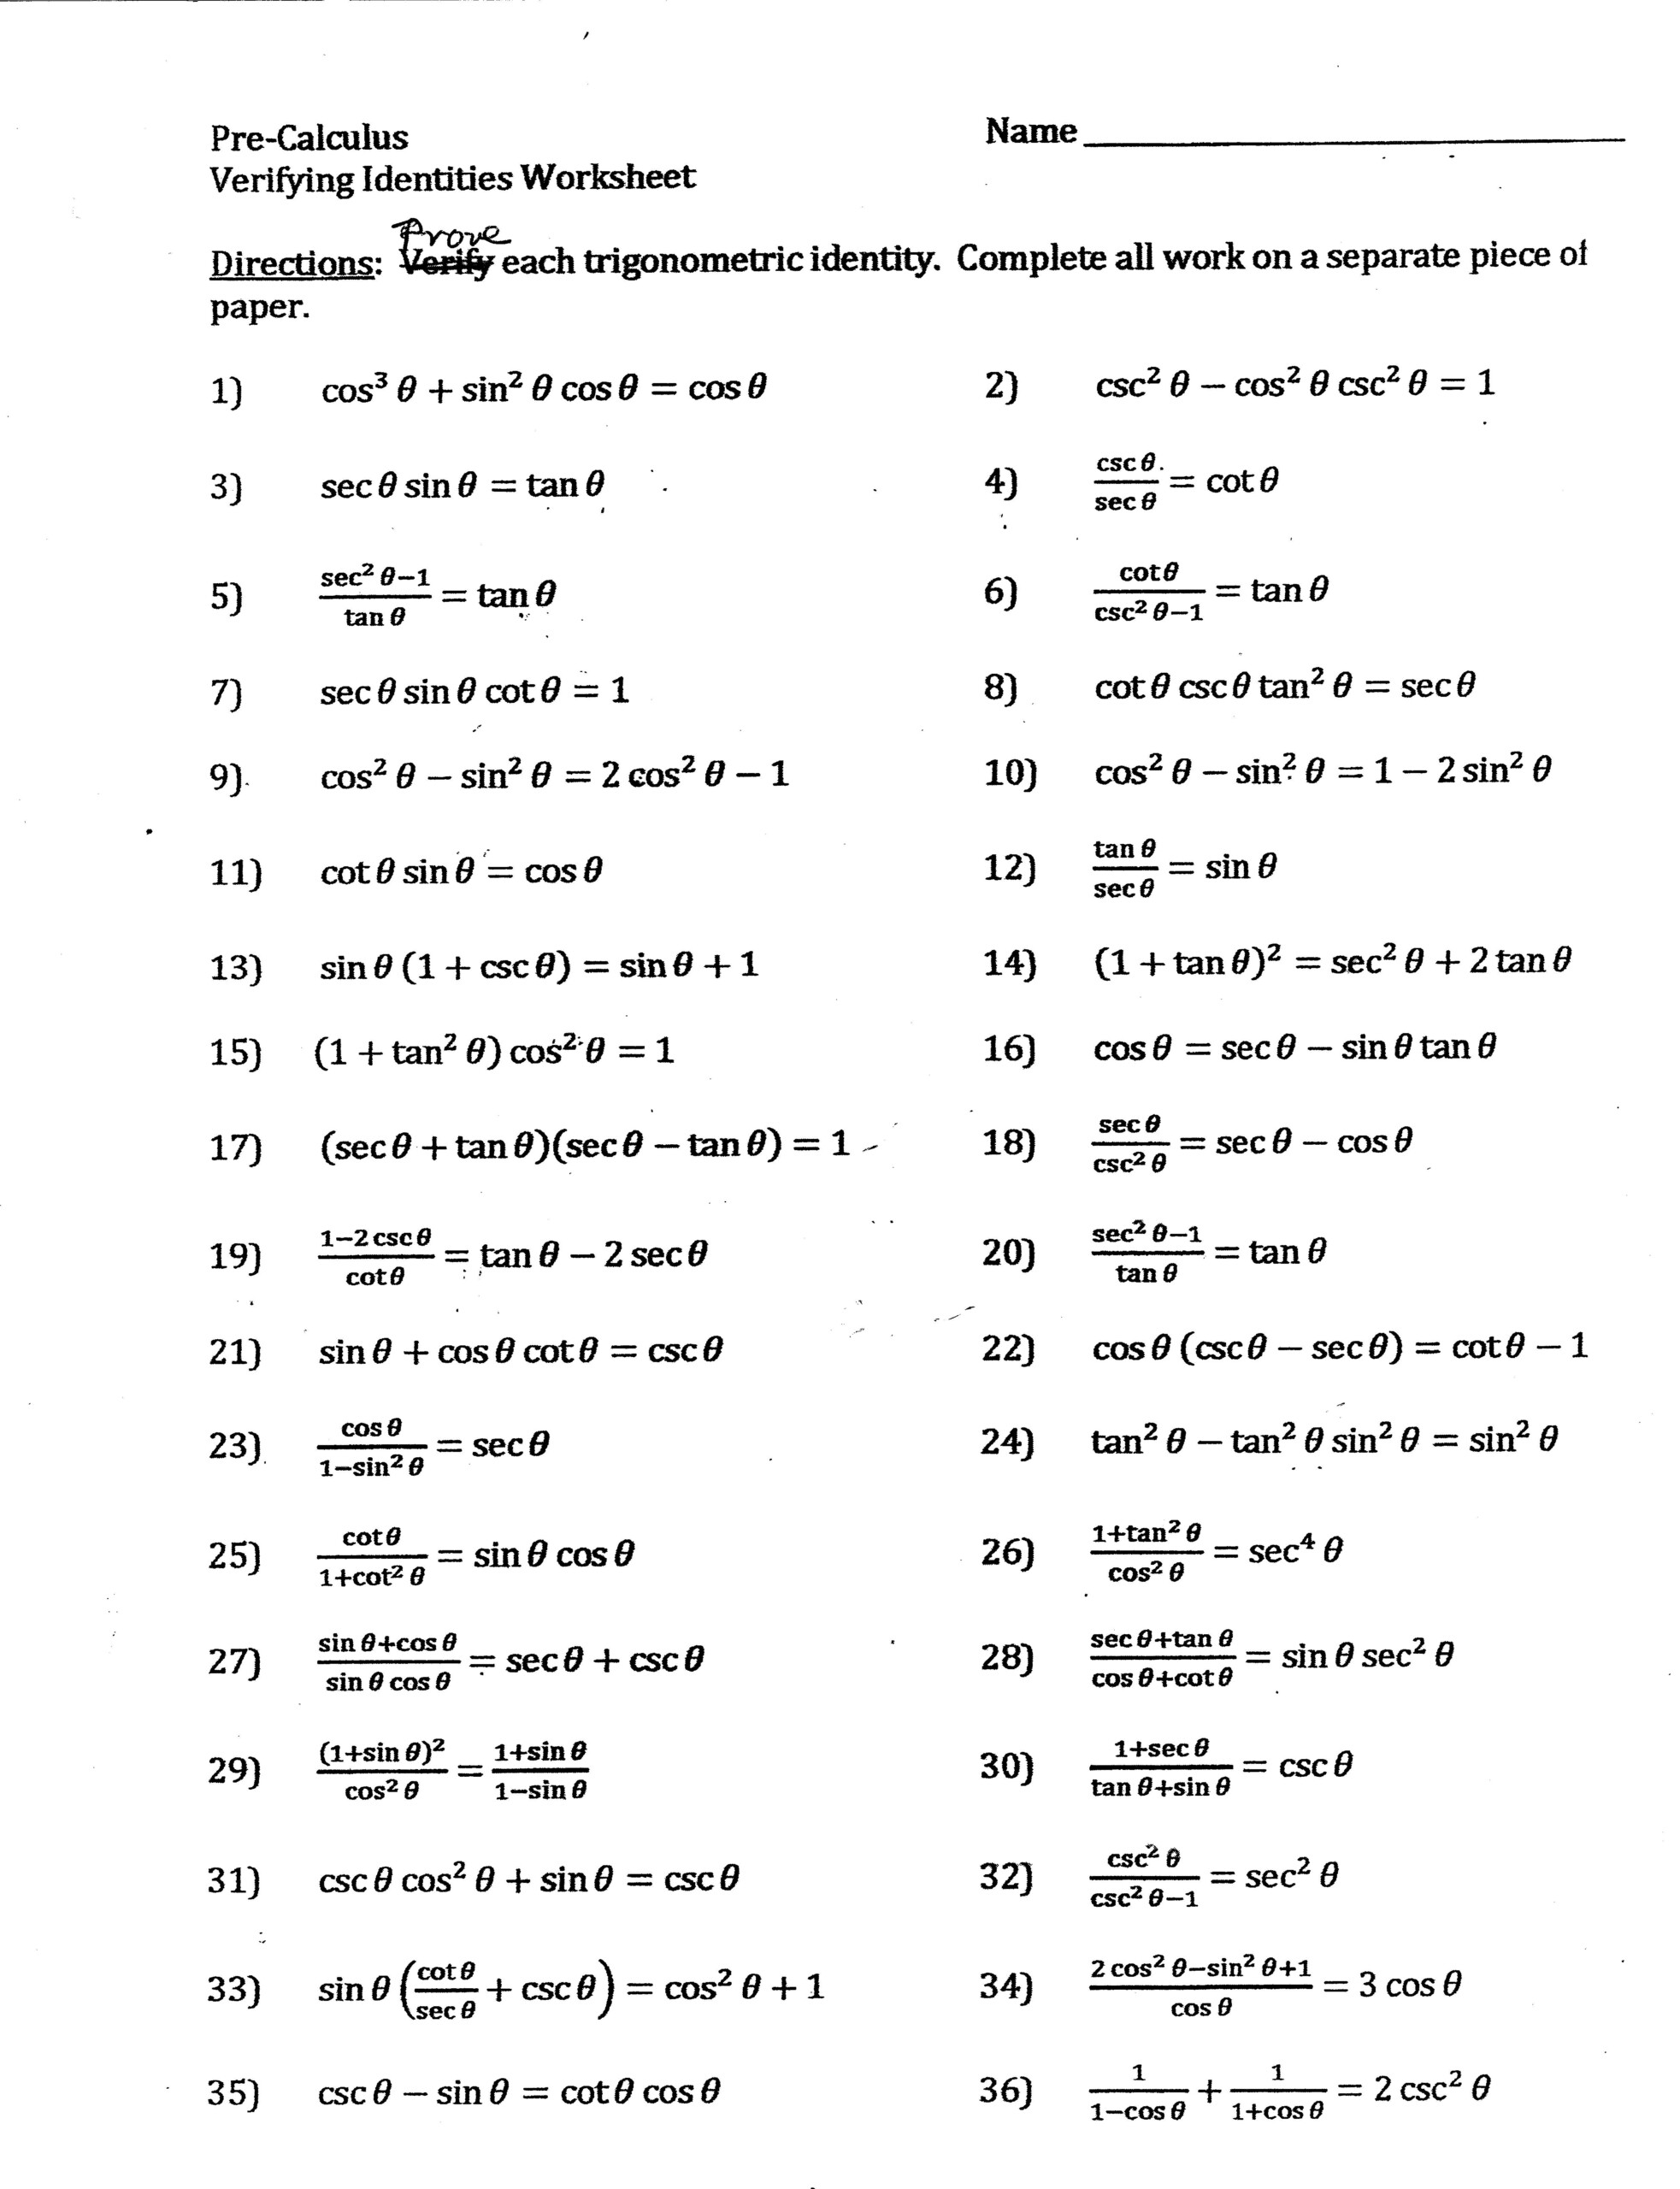 composite-functions-worksheet-answers